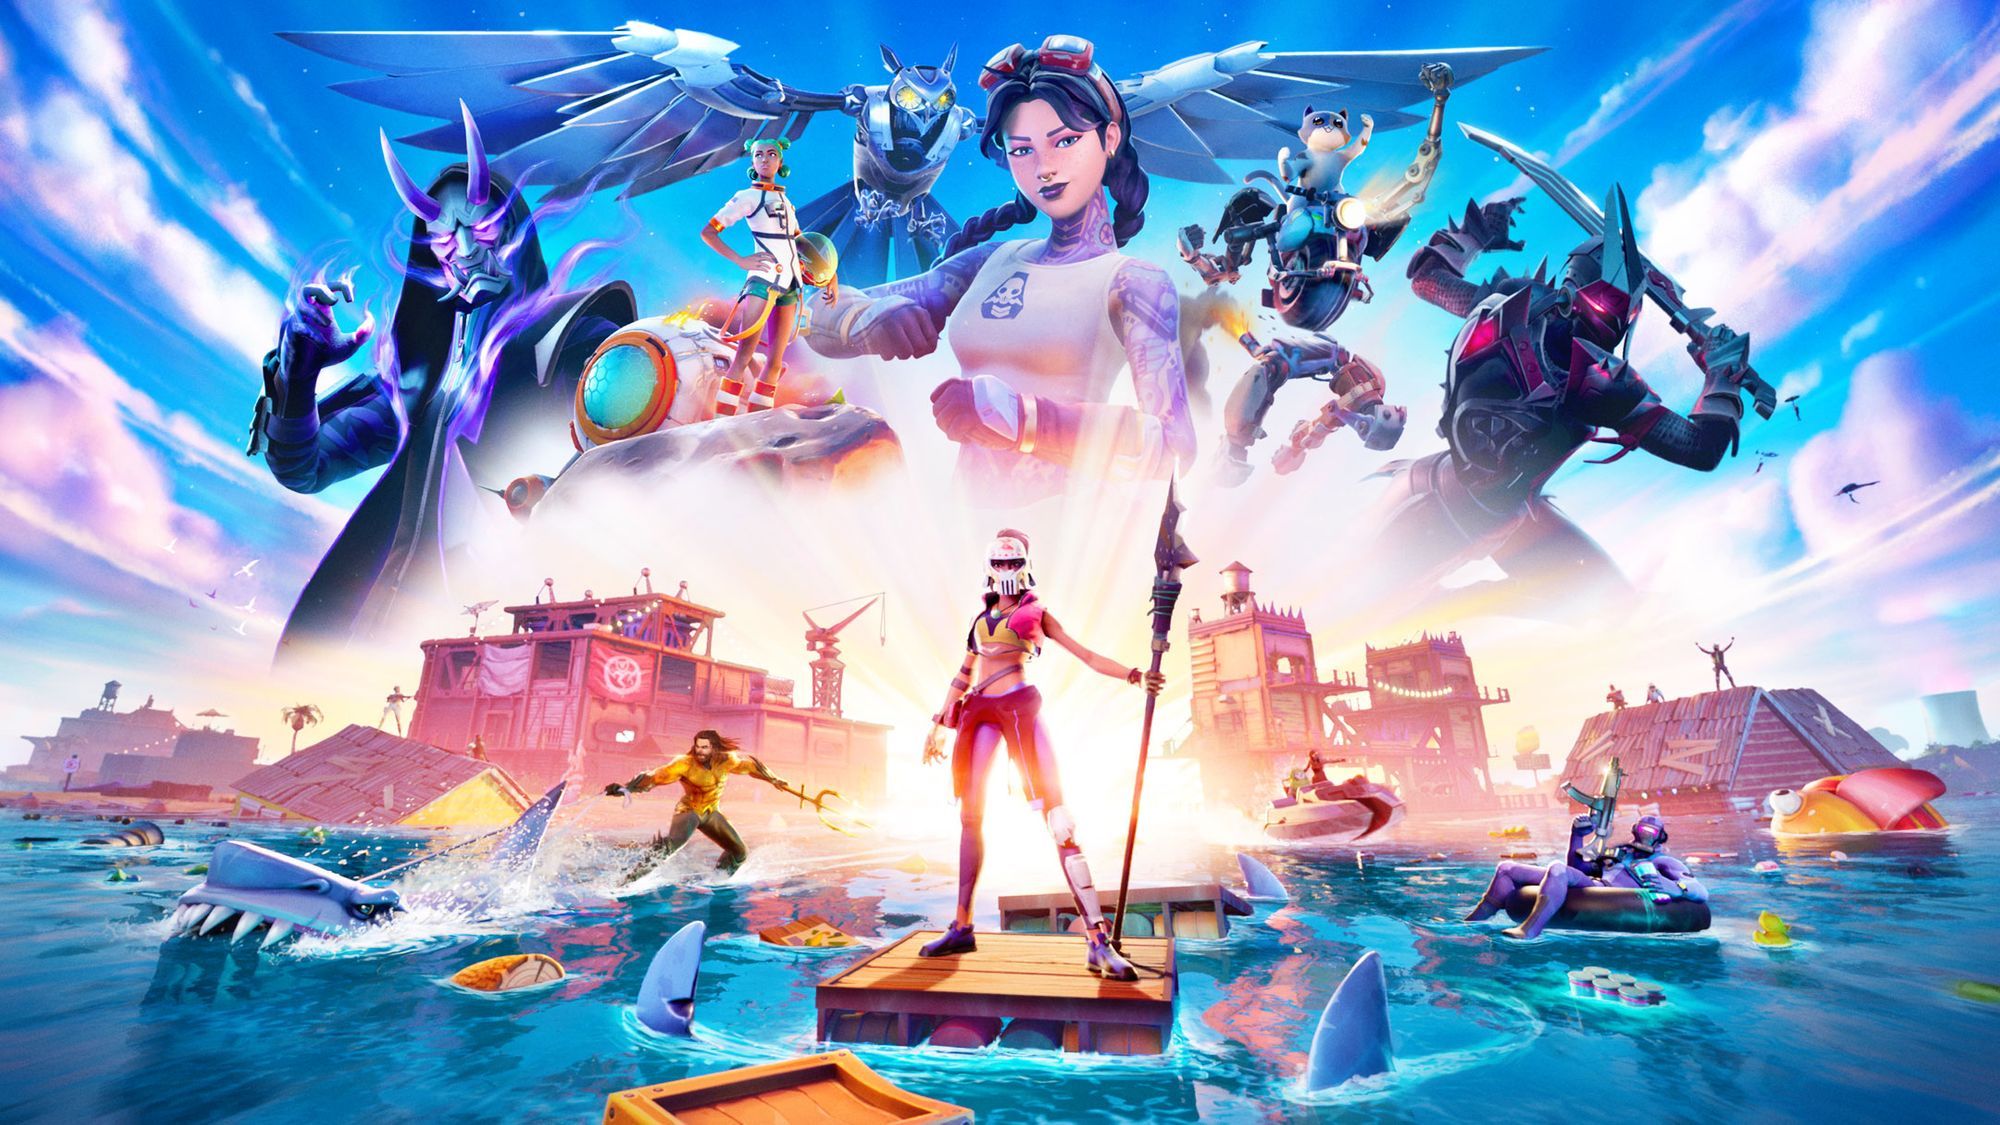 Fortnite pulled from App Store, Epic Games sues Apple